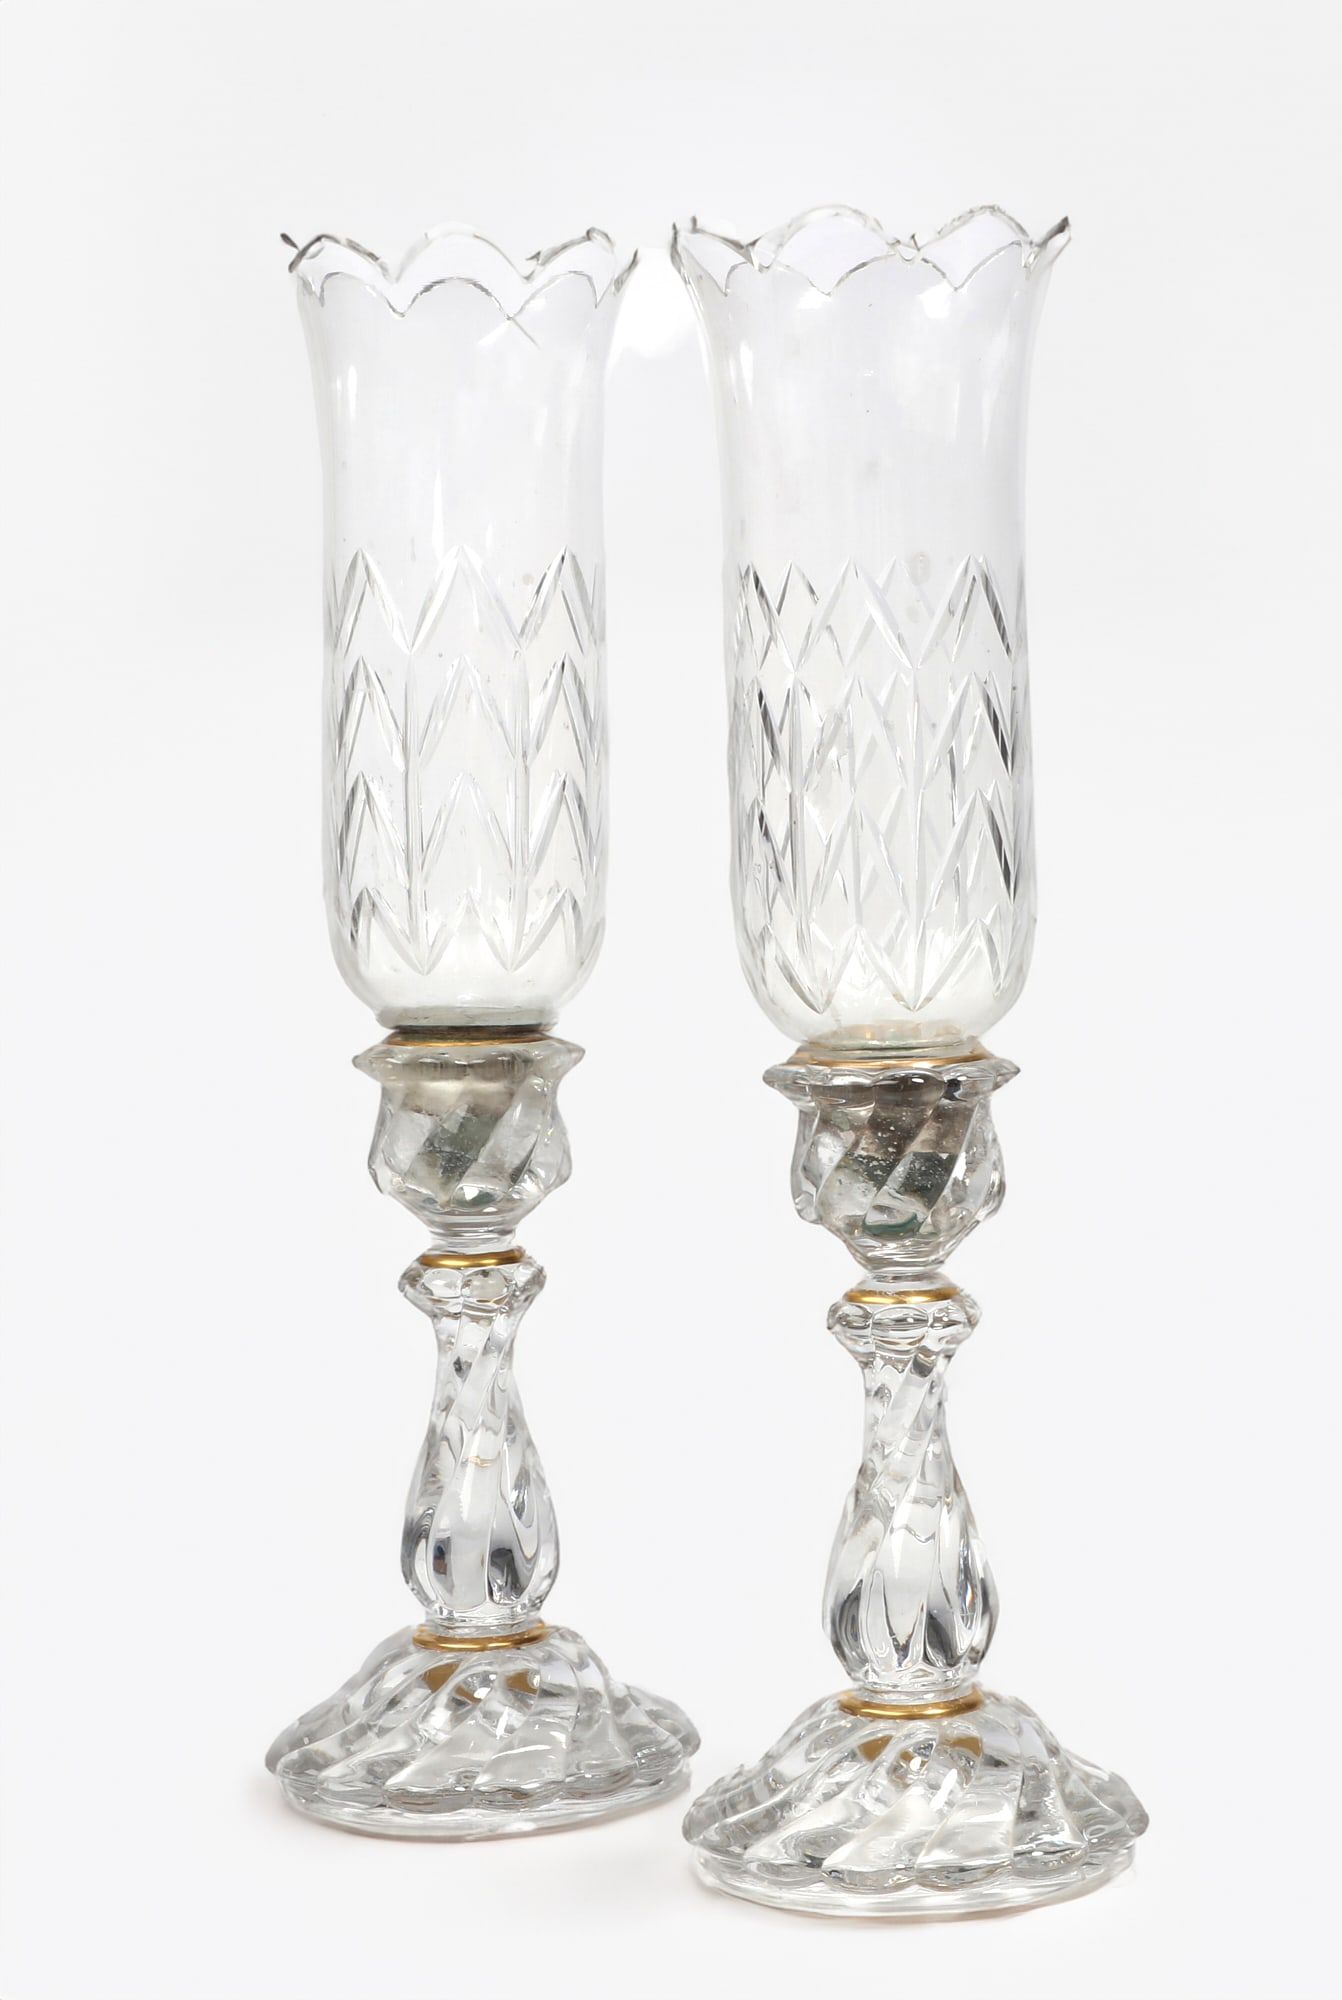 A PAIR OF BACCARAT CANDLESTICK